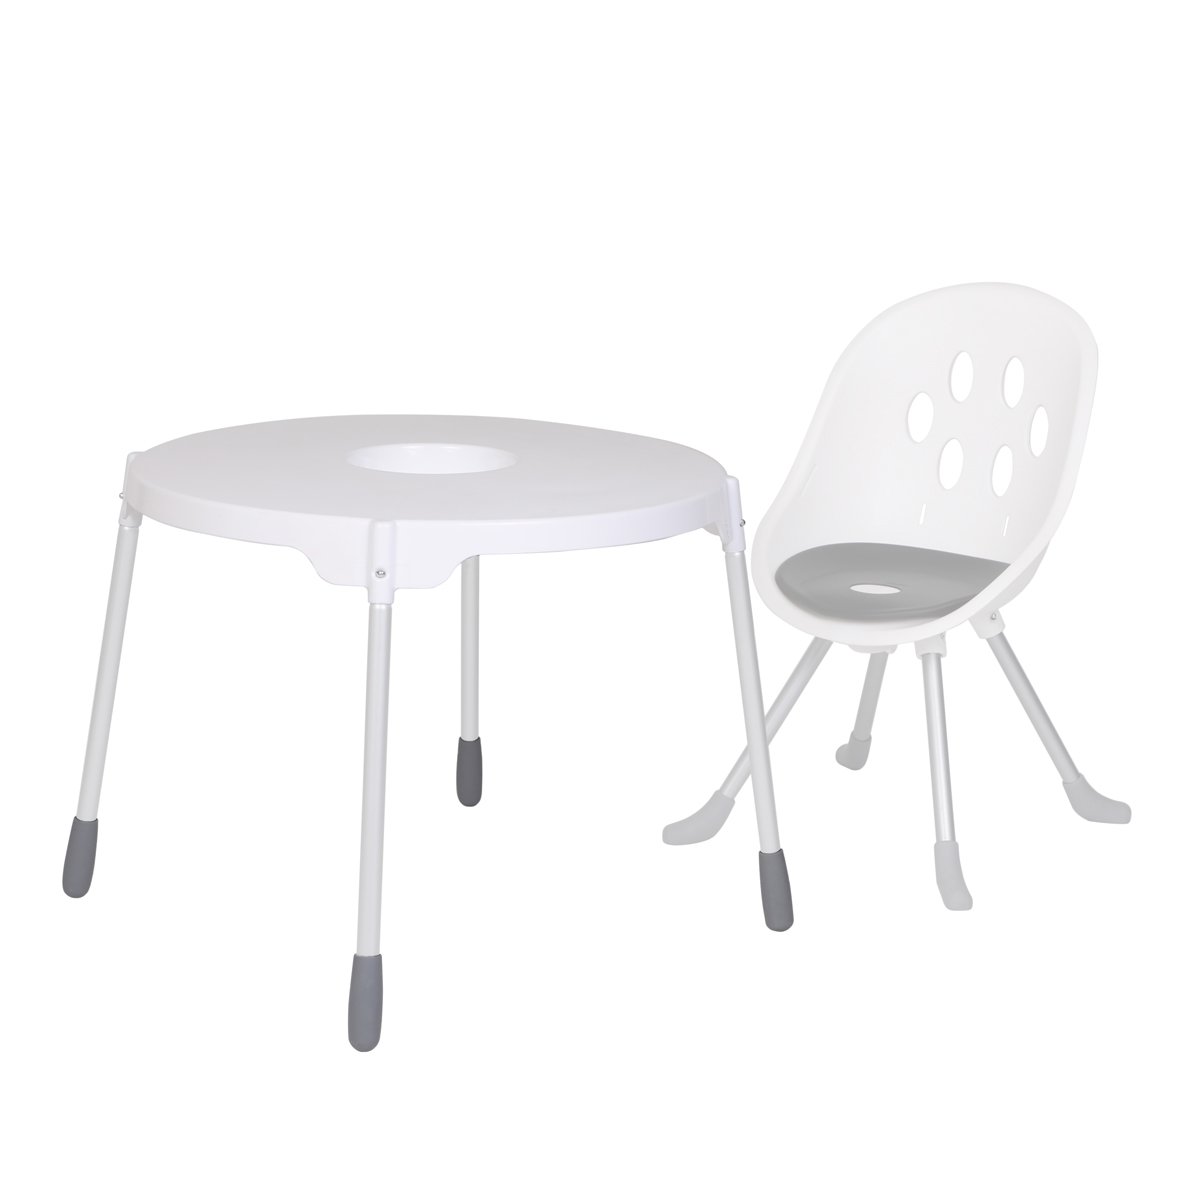 https://cdn.accentuate.io/4676346937432/19272668184664/phil_and_teds_poppy_table_top_with_leg_set_and_poppy_high_chair_1-v1630984557888.jpg?1200x1200